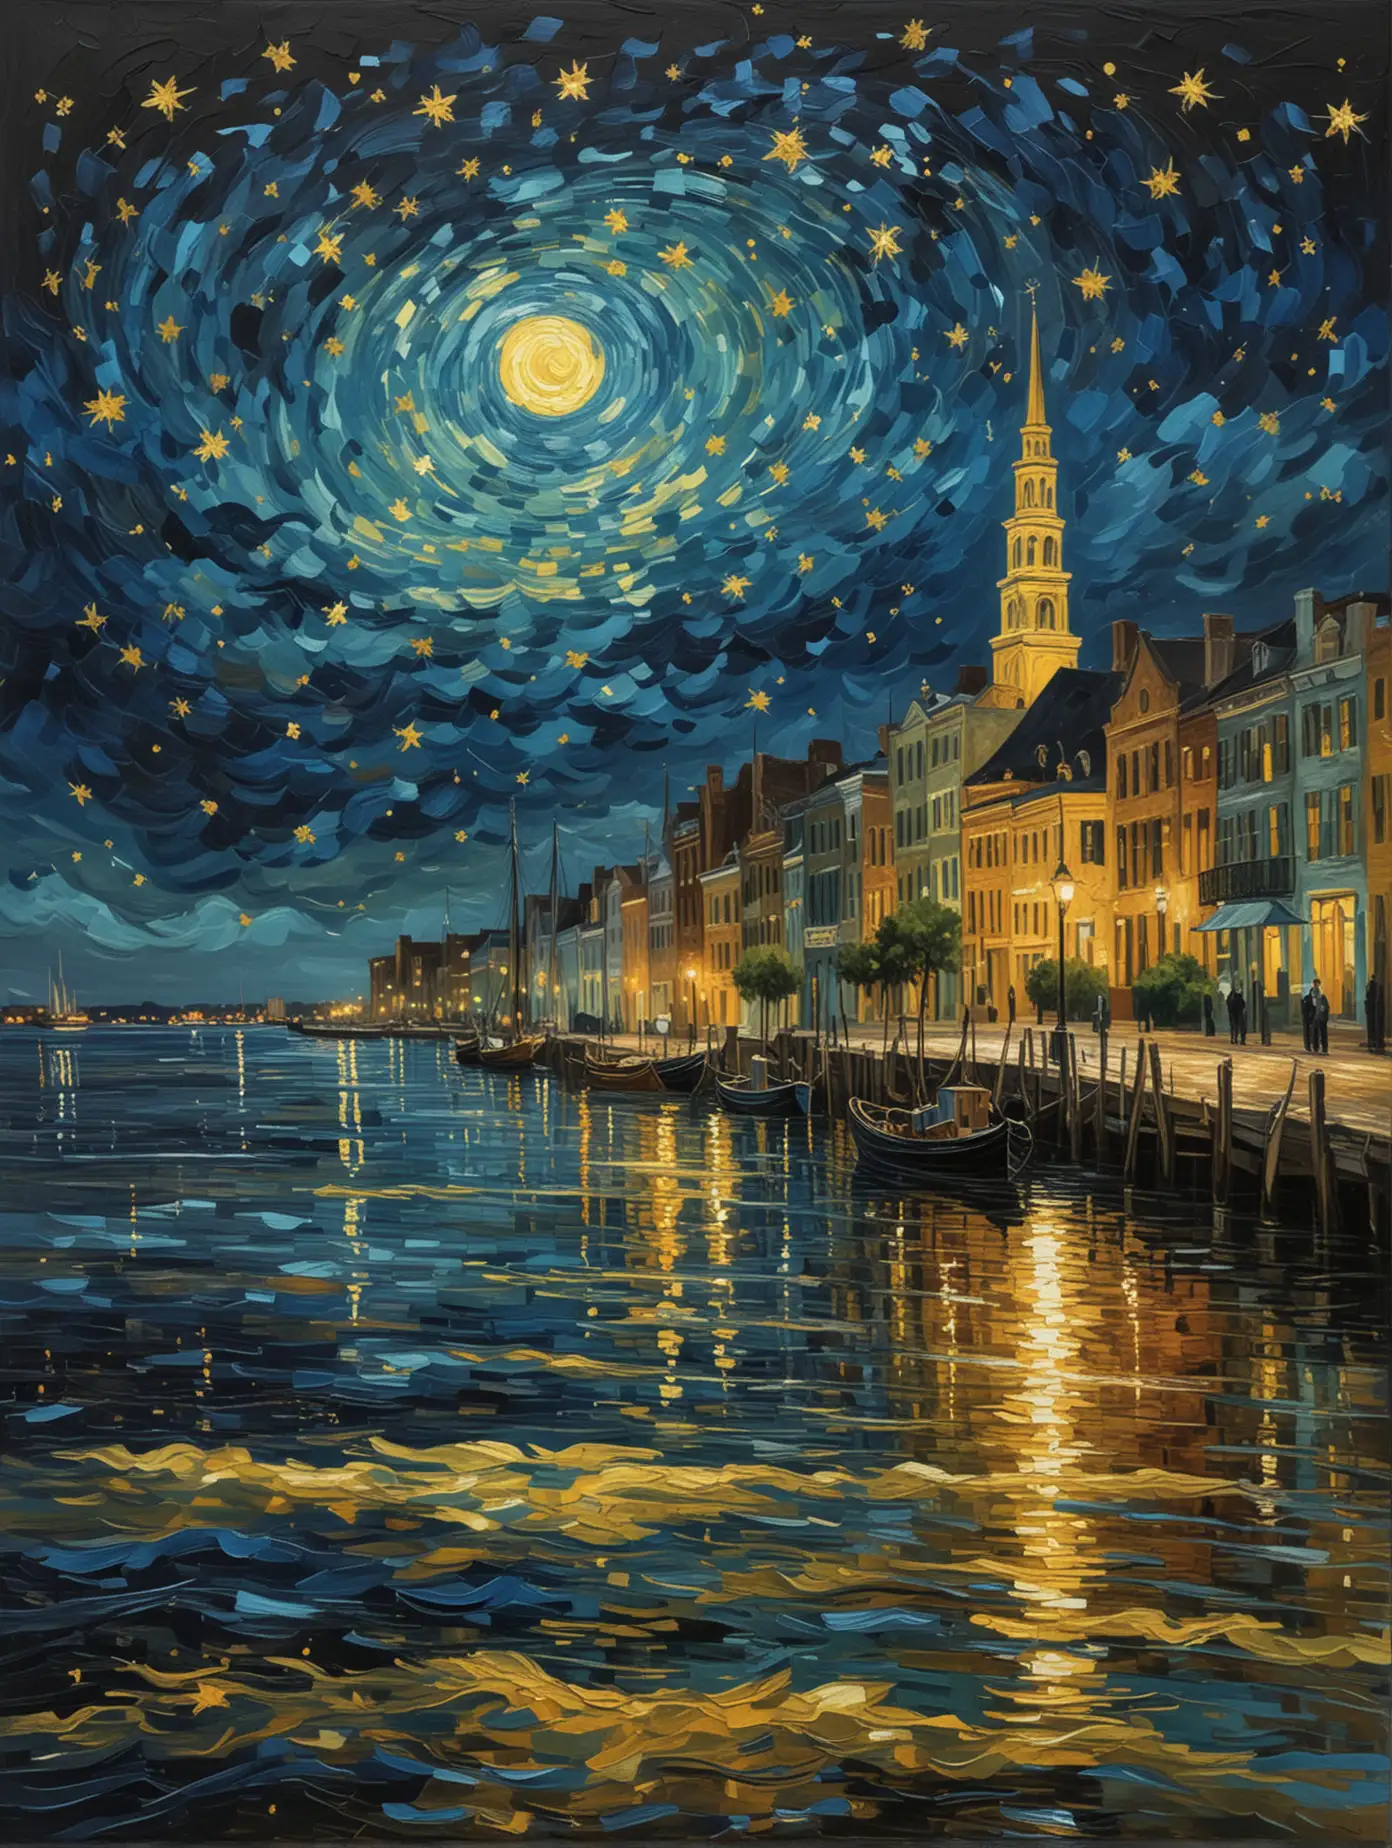 Vibrant-Starry-Night-Over-Charleston-Abstract-Van-Goghinspired-Painting